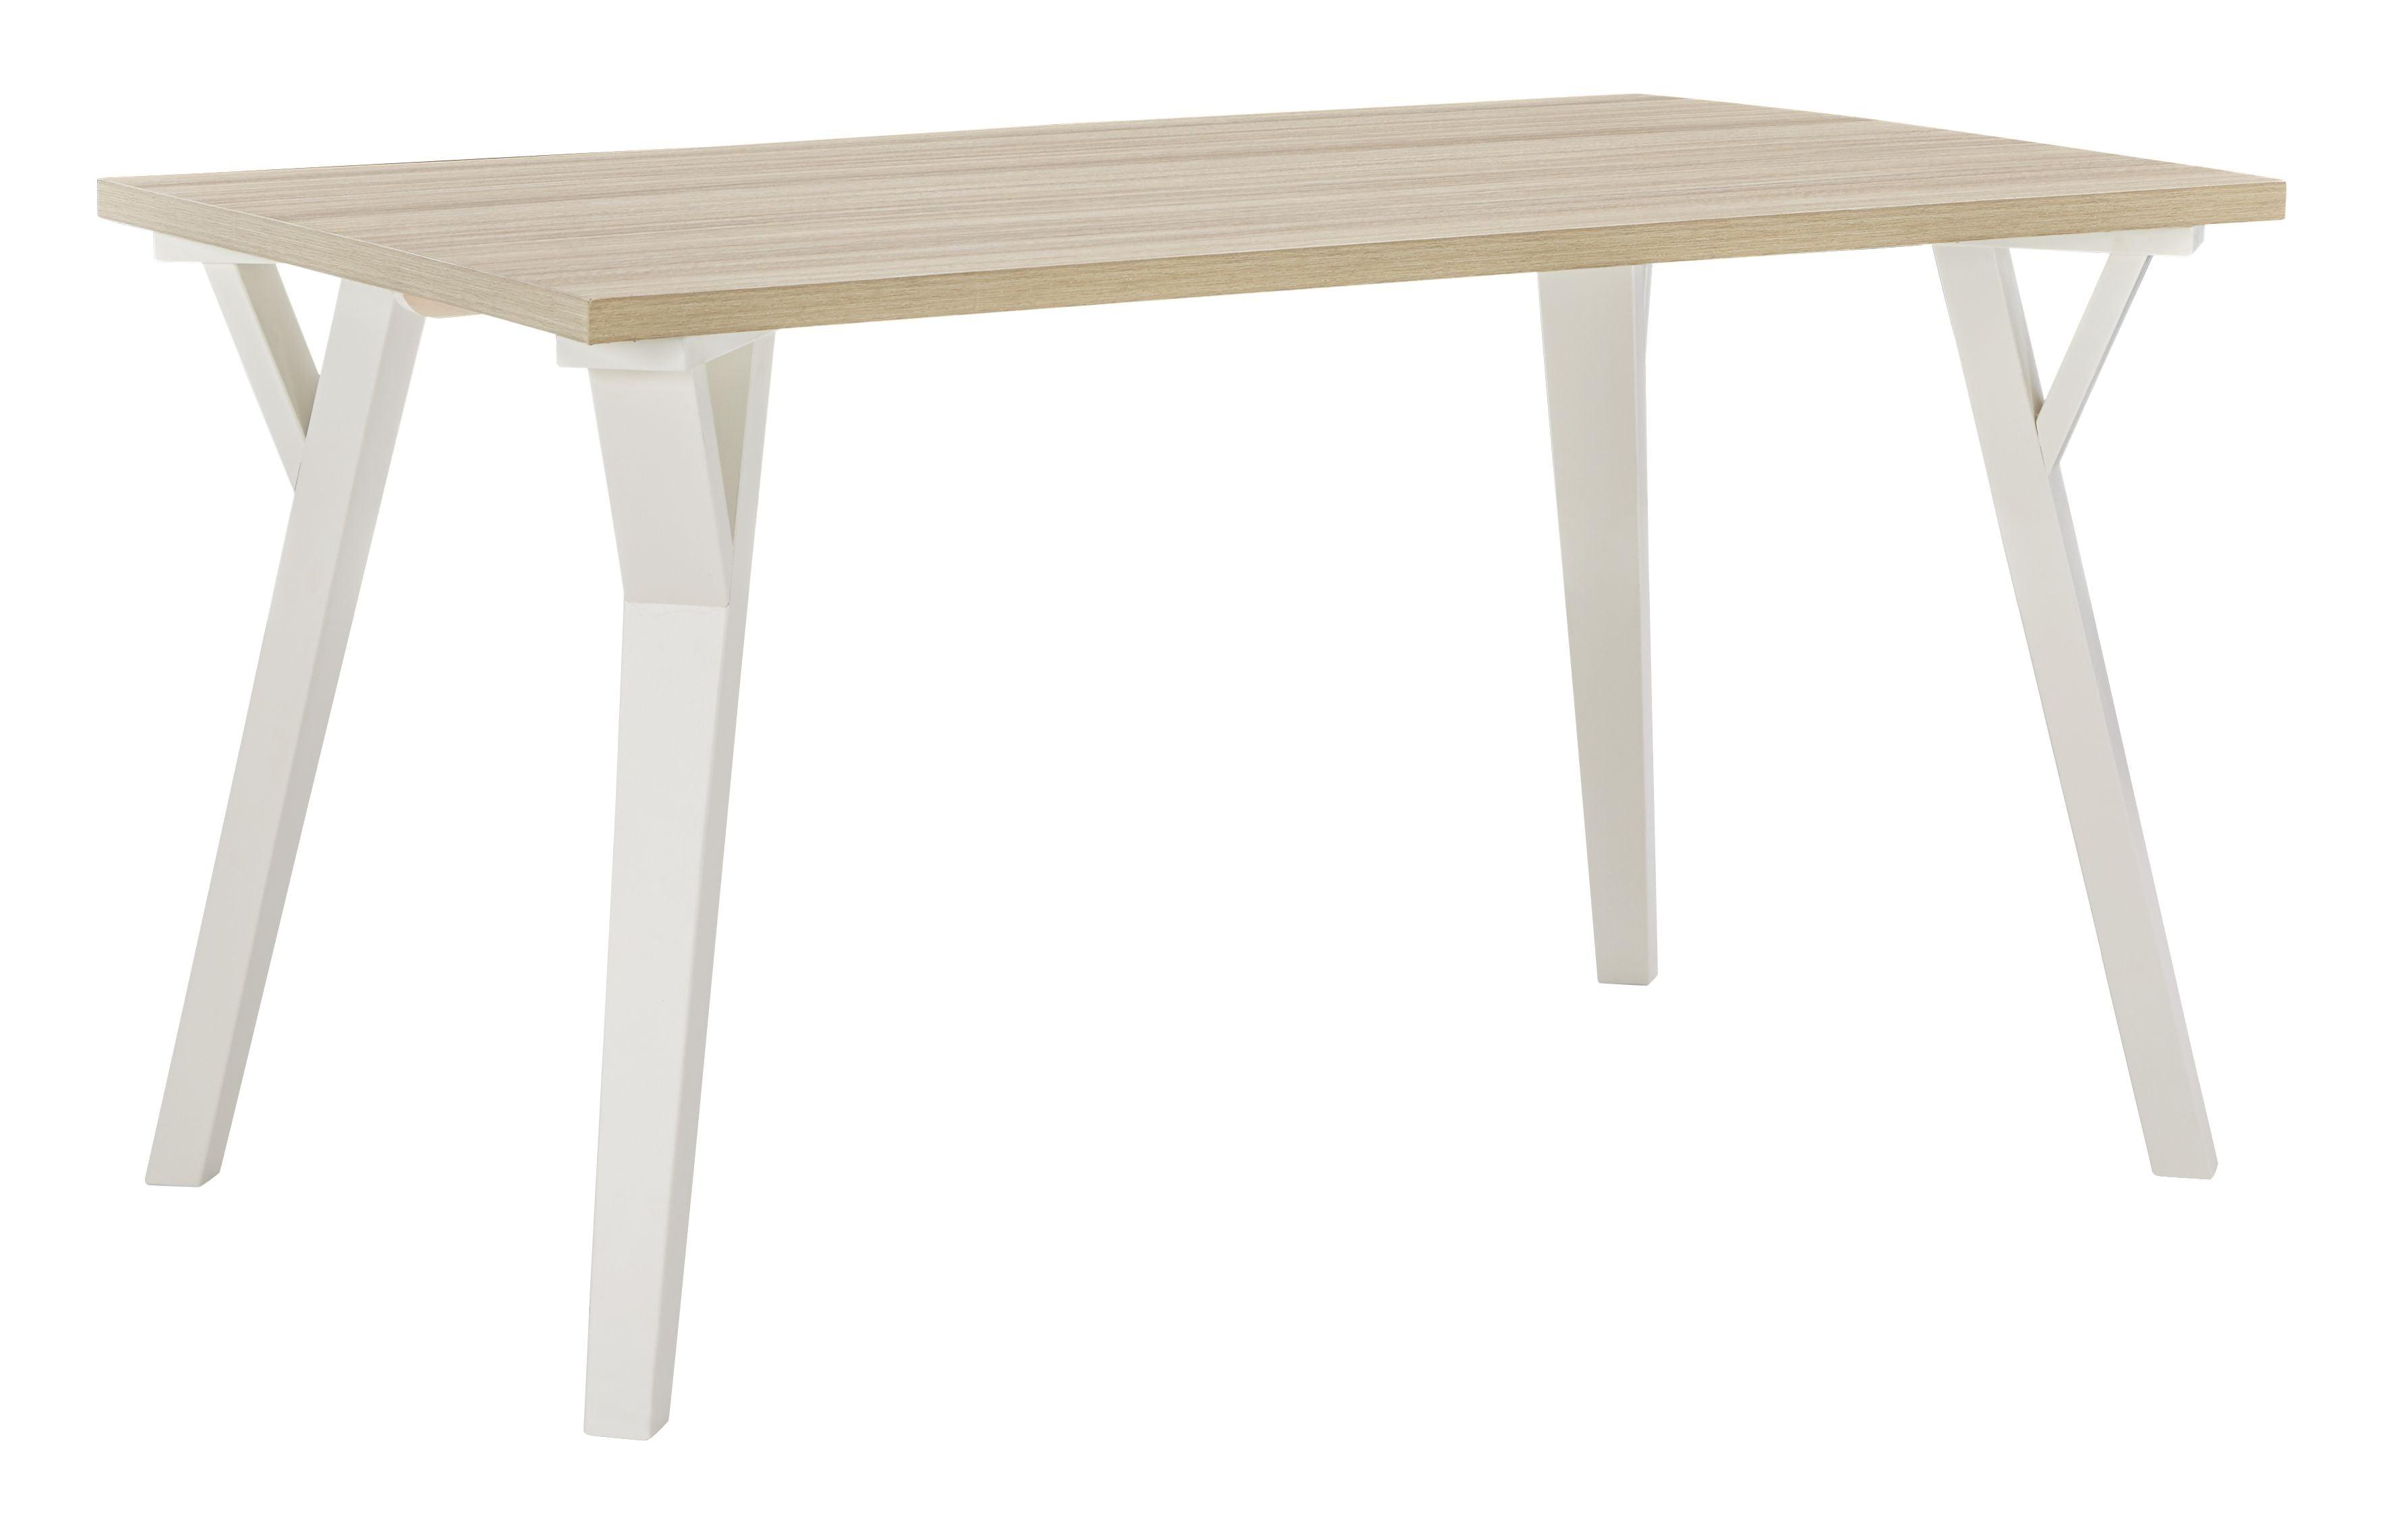 Signature Design by Ashley® - Grannen - White - Rectangular Dining Room Table - 5th Avenue Furniture